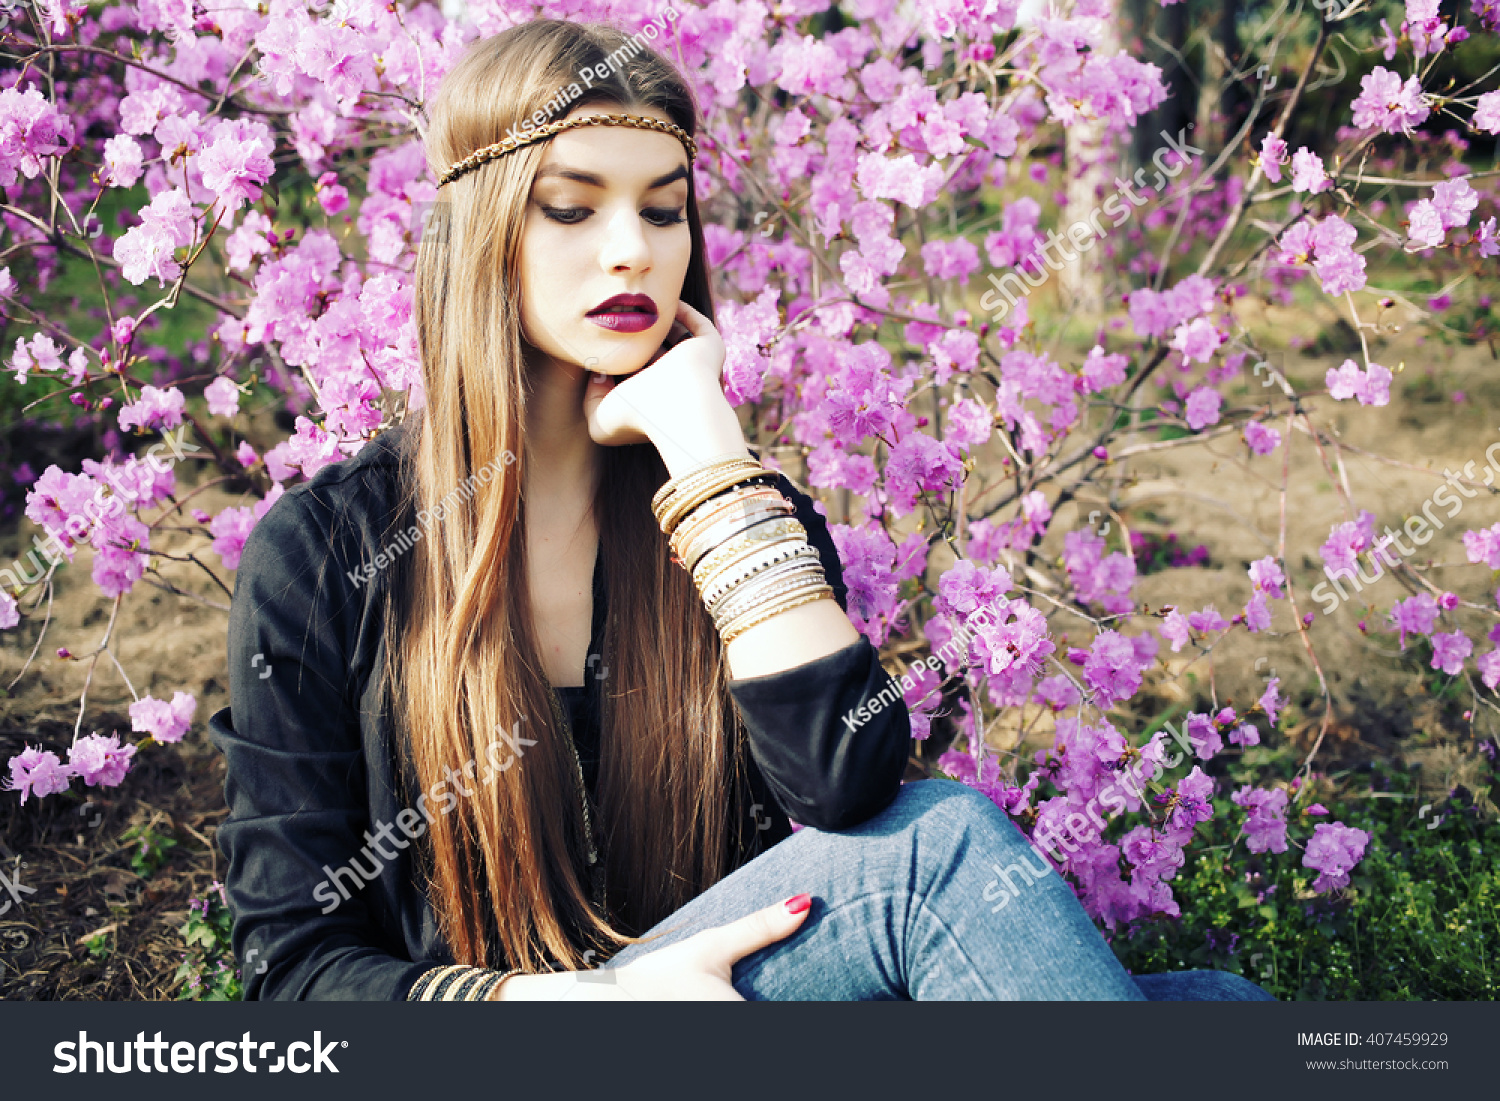 model poses for fashion photography outdoors